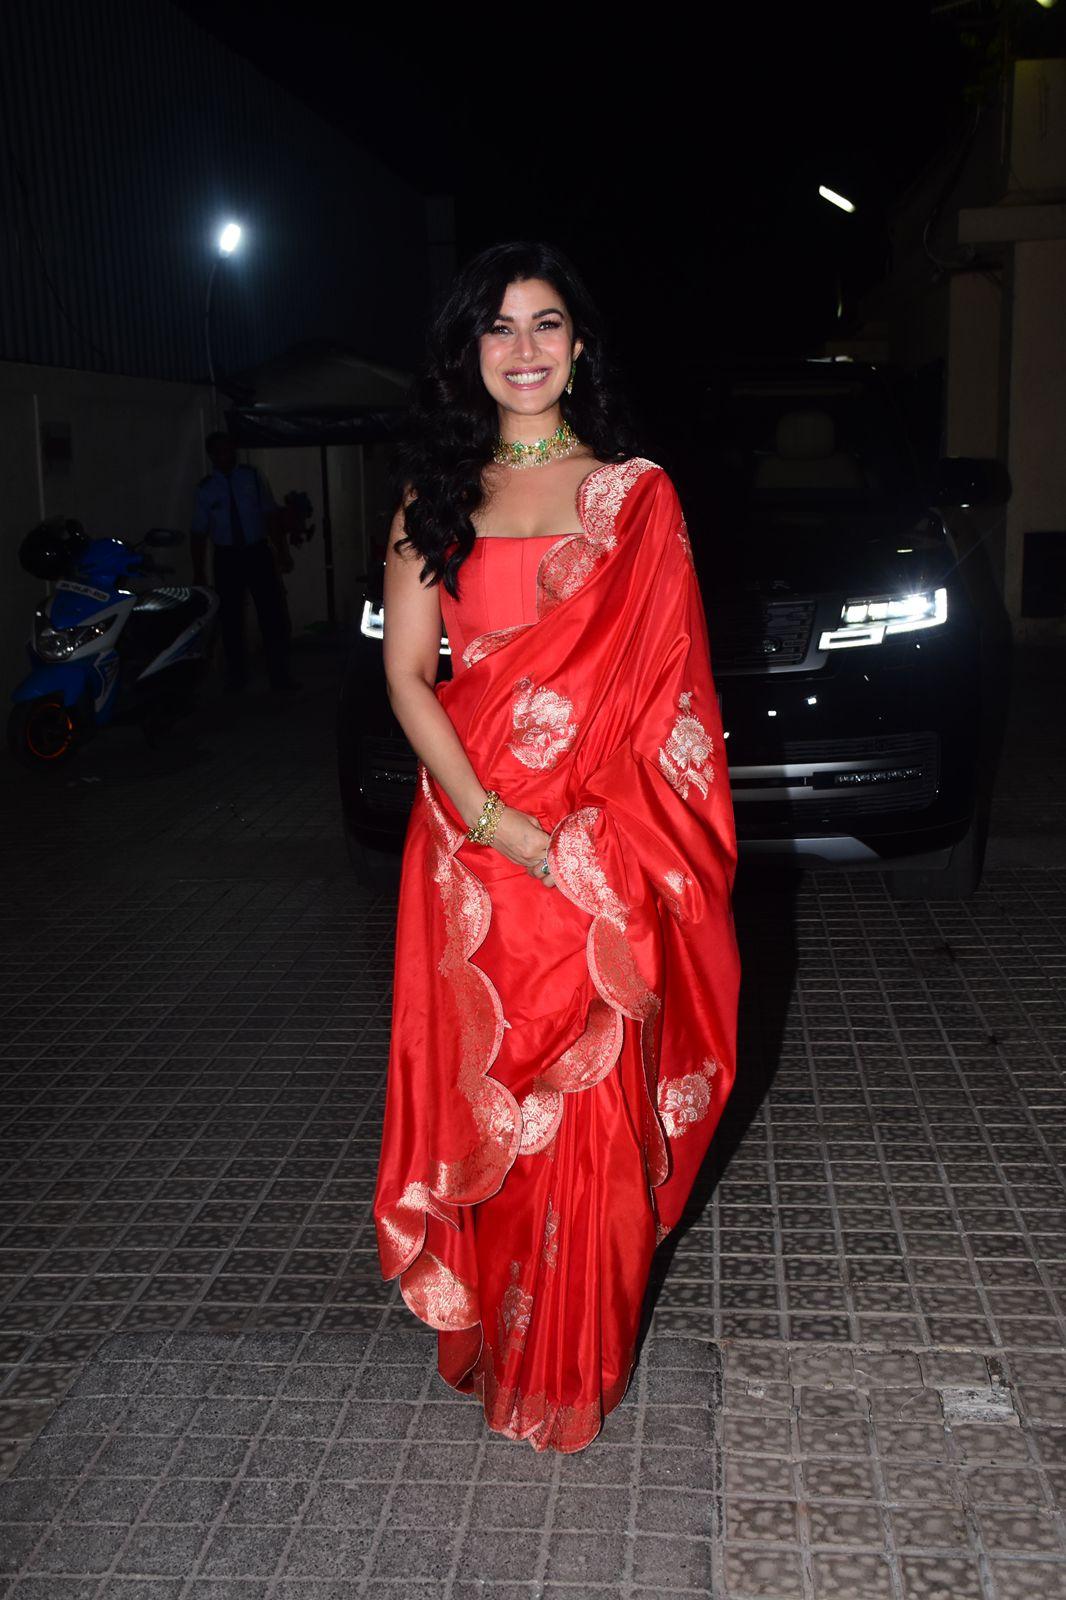 Nimrat Kaur was spotted at Juhu PVR wearing a stunning red kurta set, and she looked absolutely gorgeous